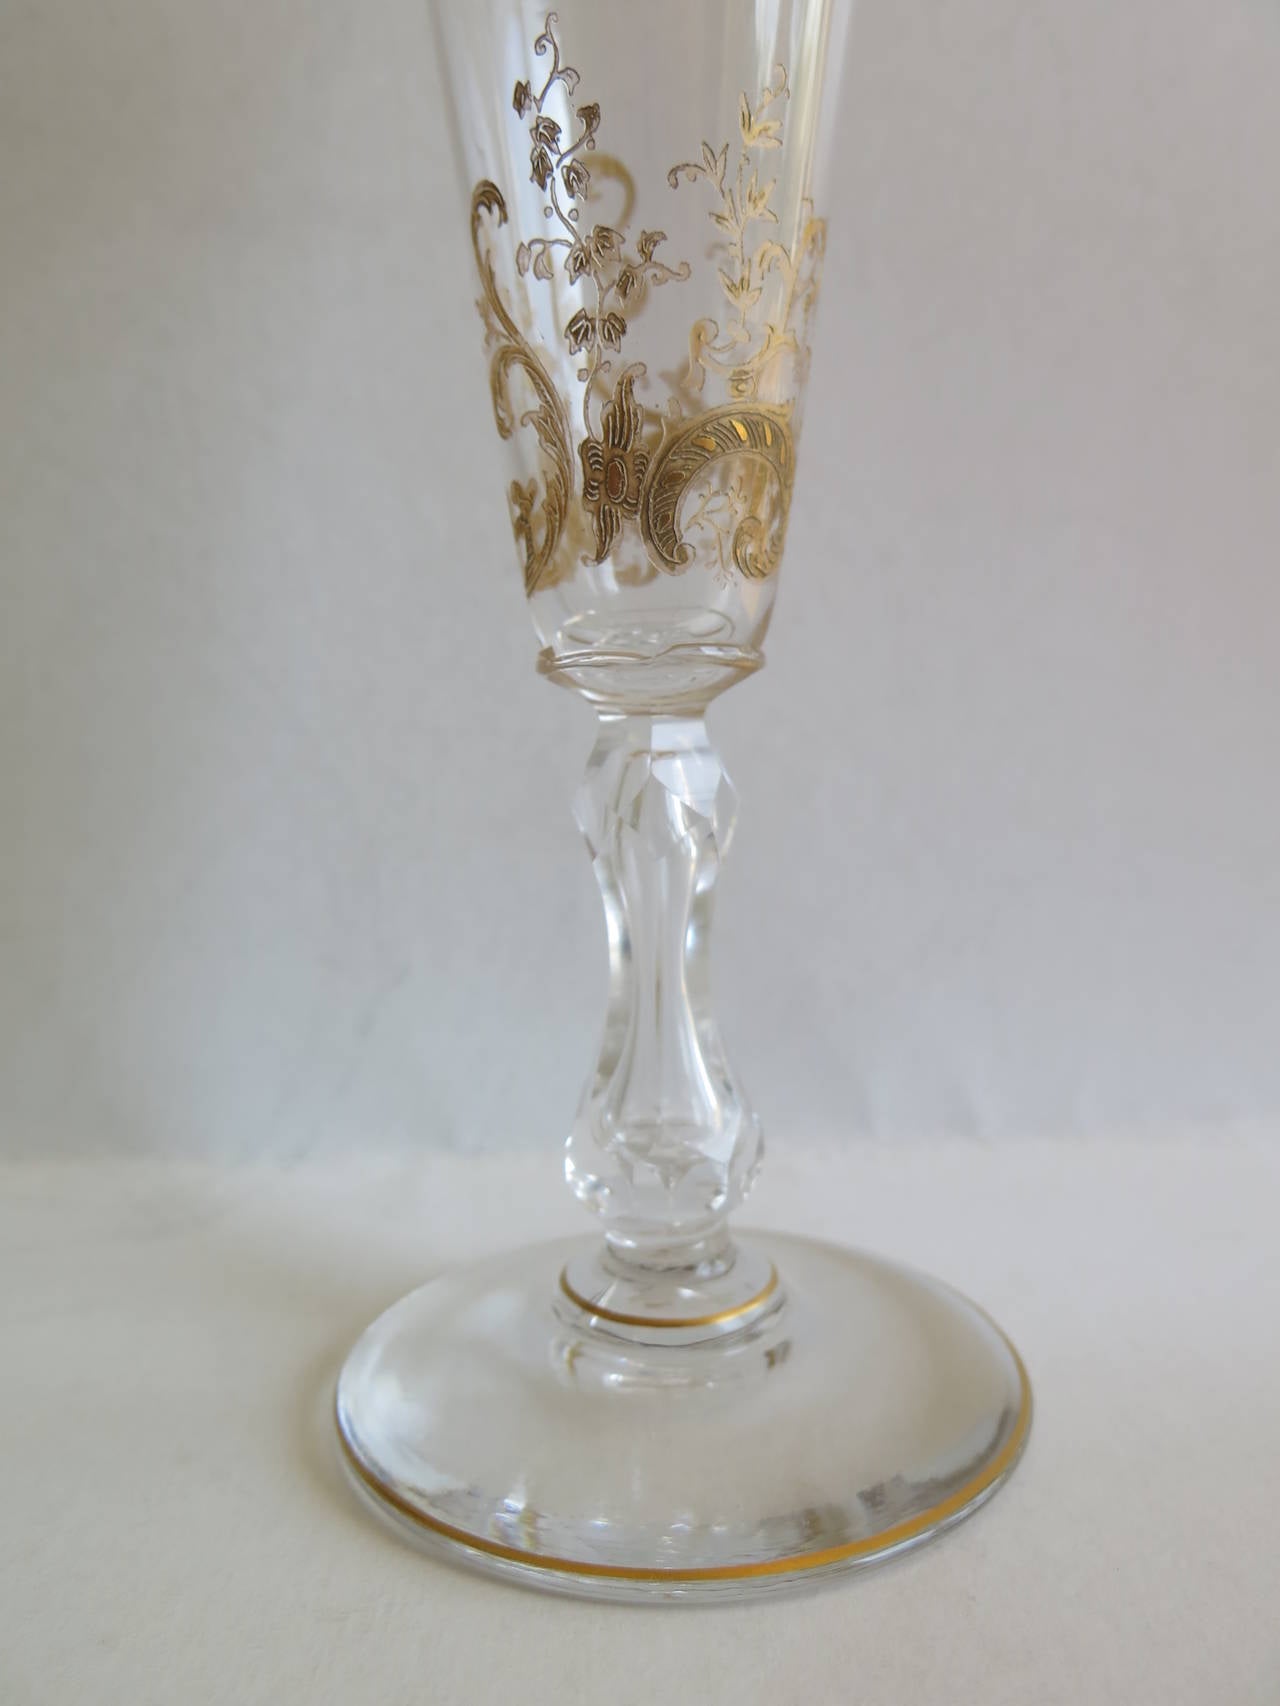 Gilt 19th Century Pair of Gilded Champagne Flutes or Wine Glasses, French circa 1880